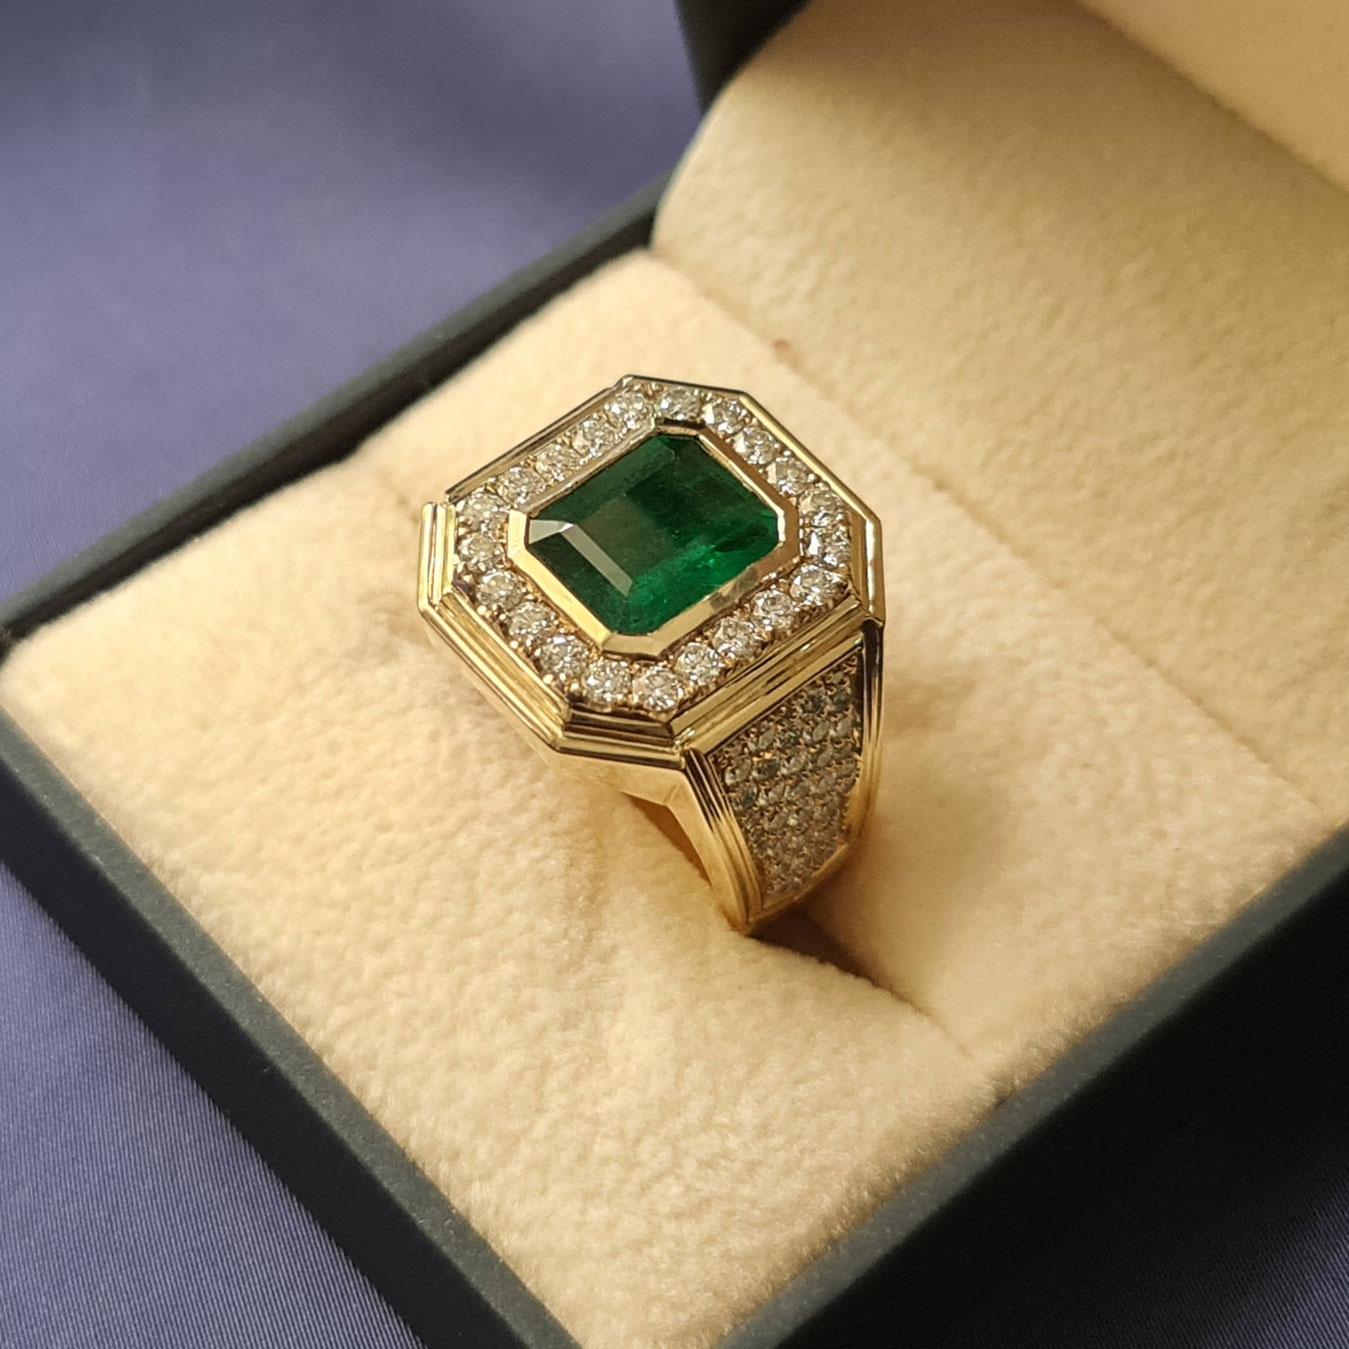 For Sale:  Men's luxury green emerald ring , 3.25ct natural emerald, 1.85ct natural diamond